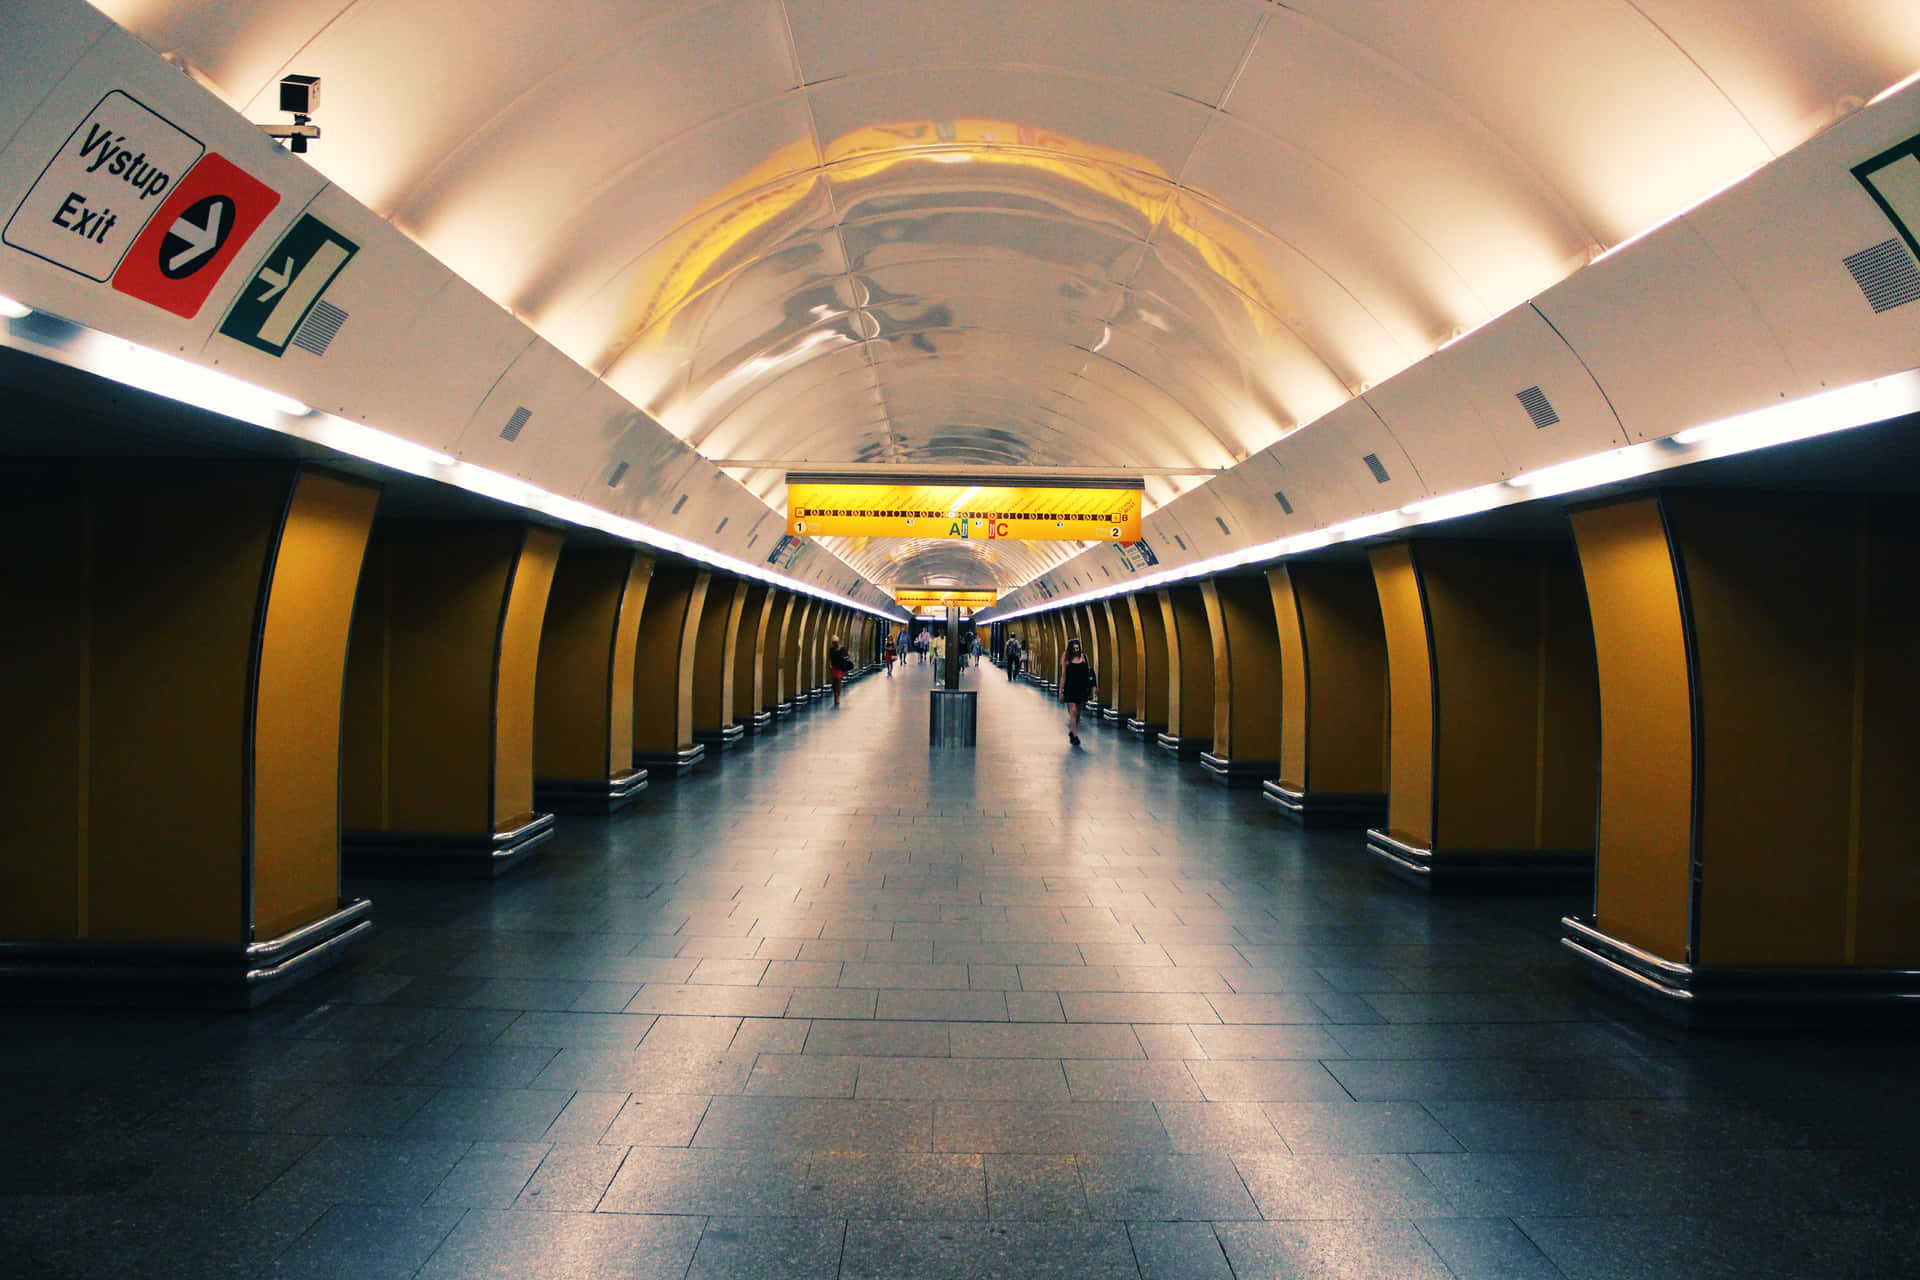 A Long Hallway With A Yellow Ceiling